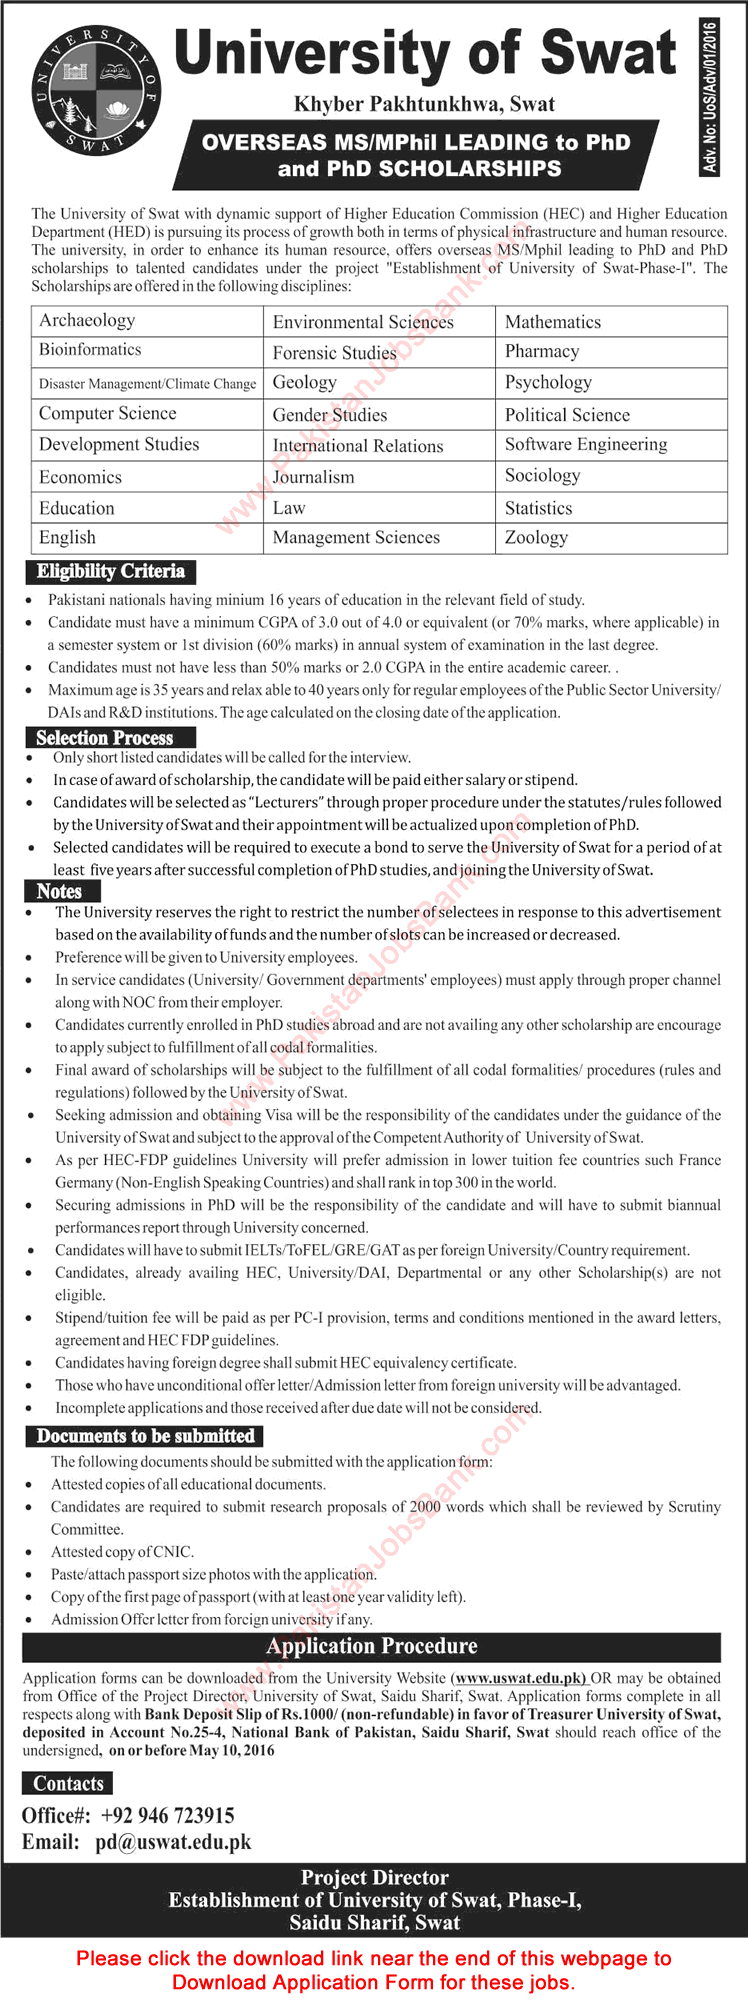 University of Swat Overseas MS / MPhil / PhD Scholarships 2016 April Application Form Download Latest